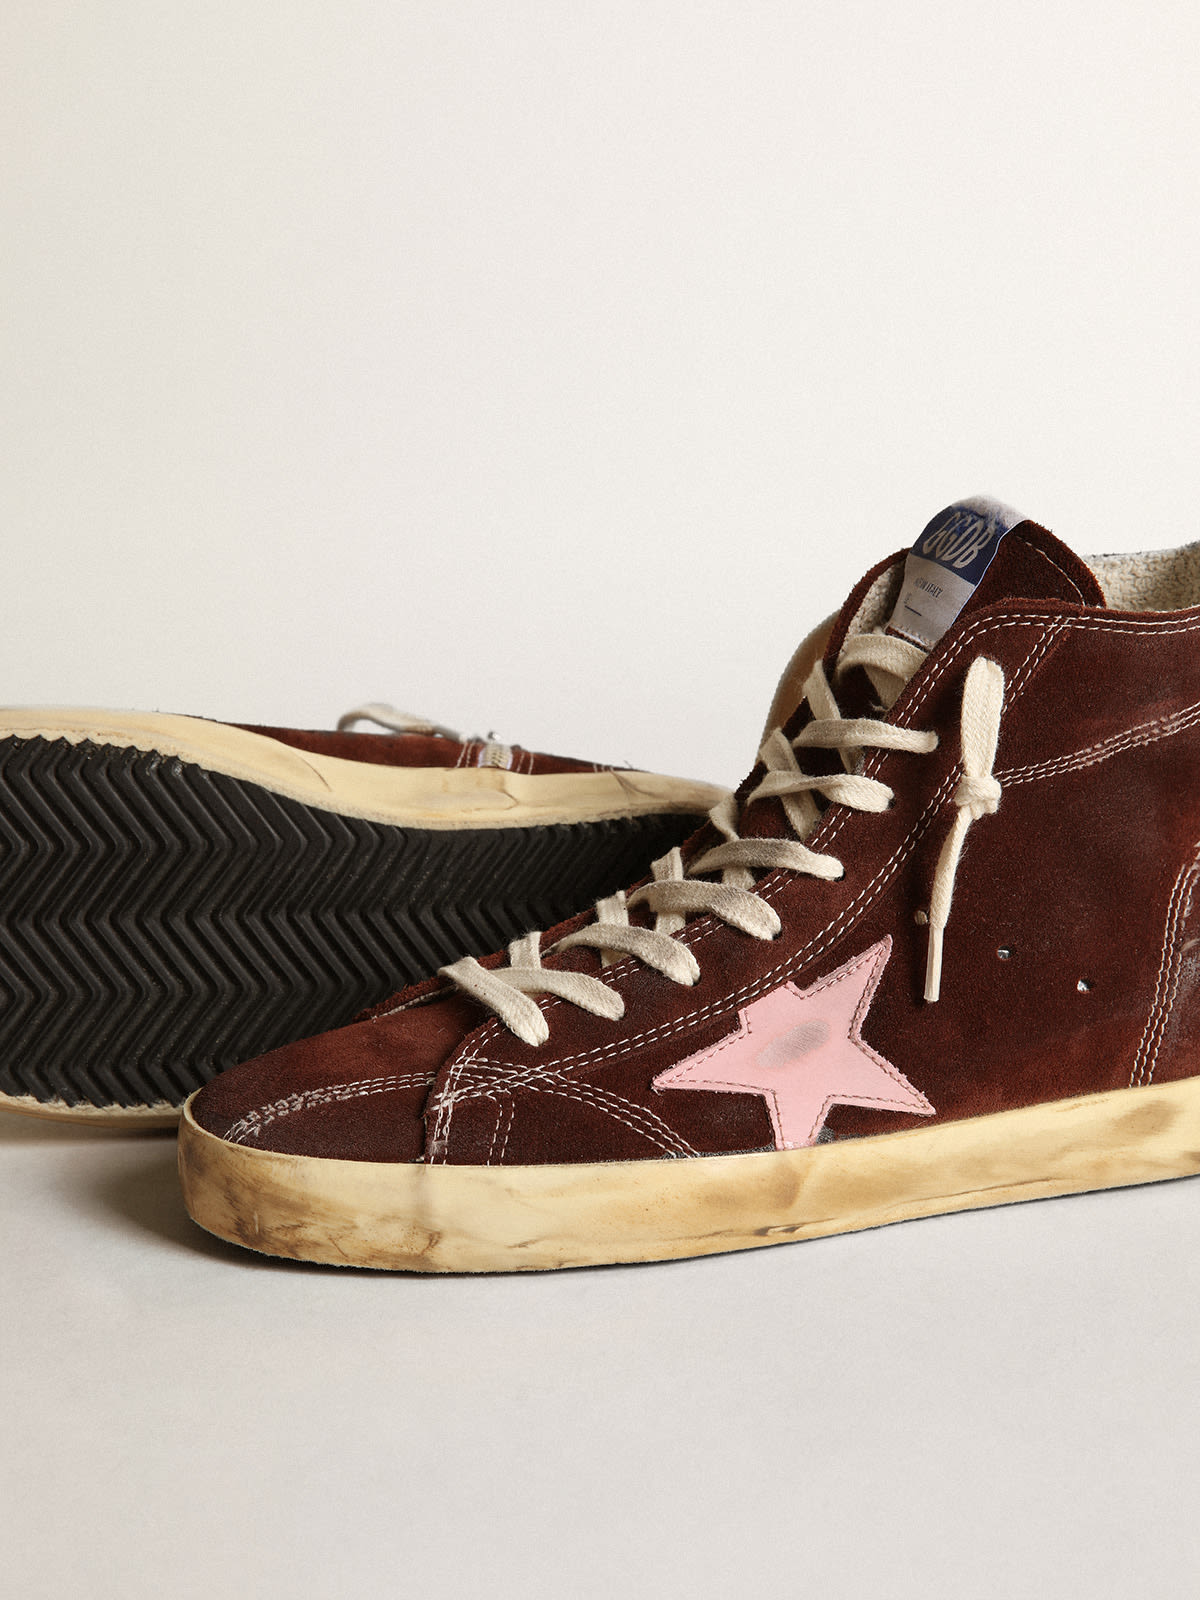 Golden Goose - Francy sneakers in brown suede with pink leather star and black nappa leather heel tab in 